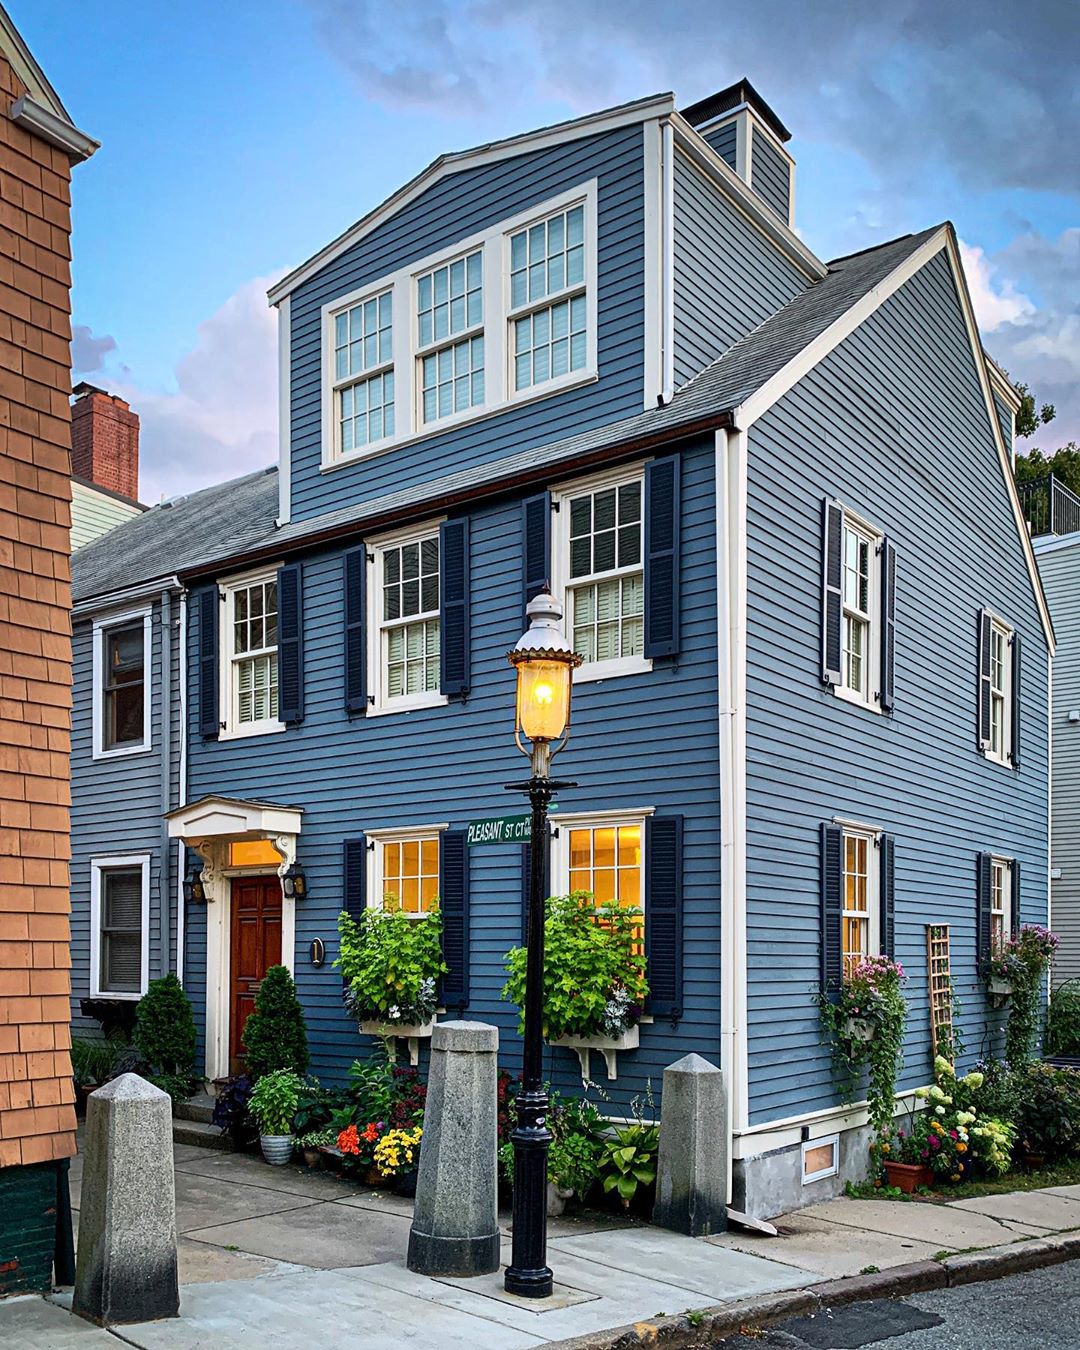 Blue Townhome in Charlestown, Boston. Photo by Instagram user @col.harrington